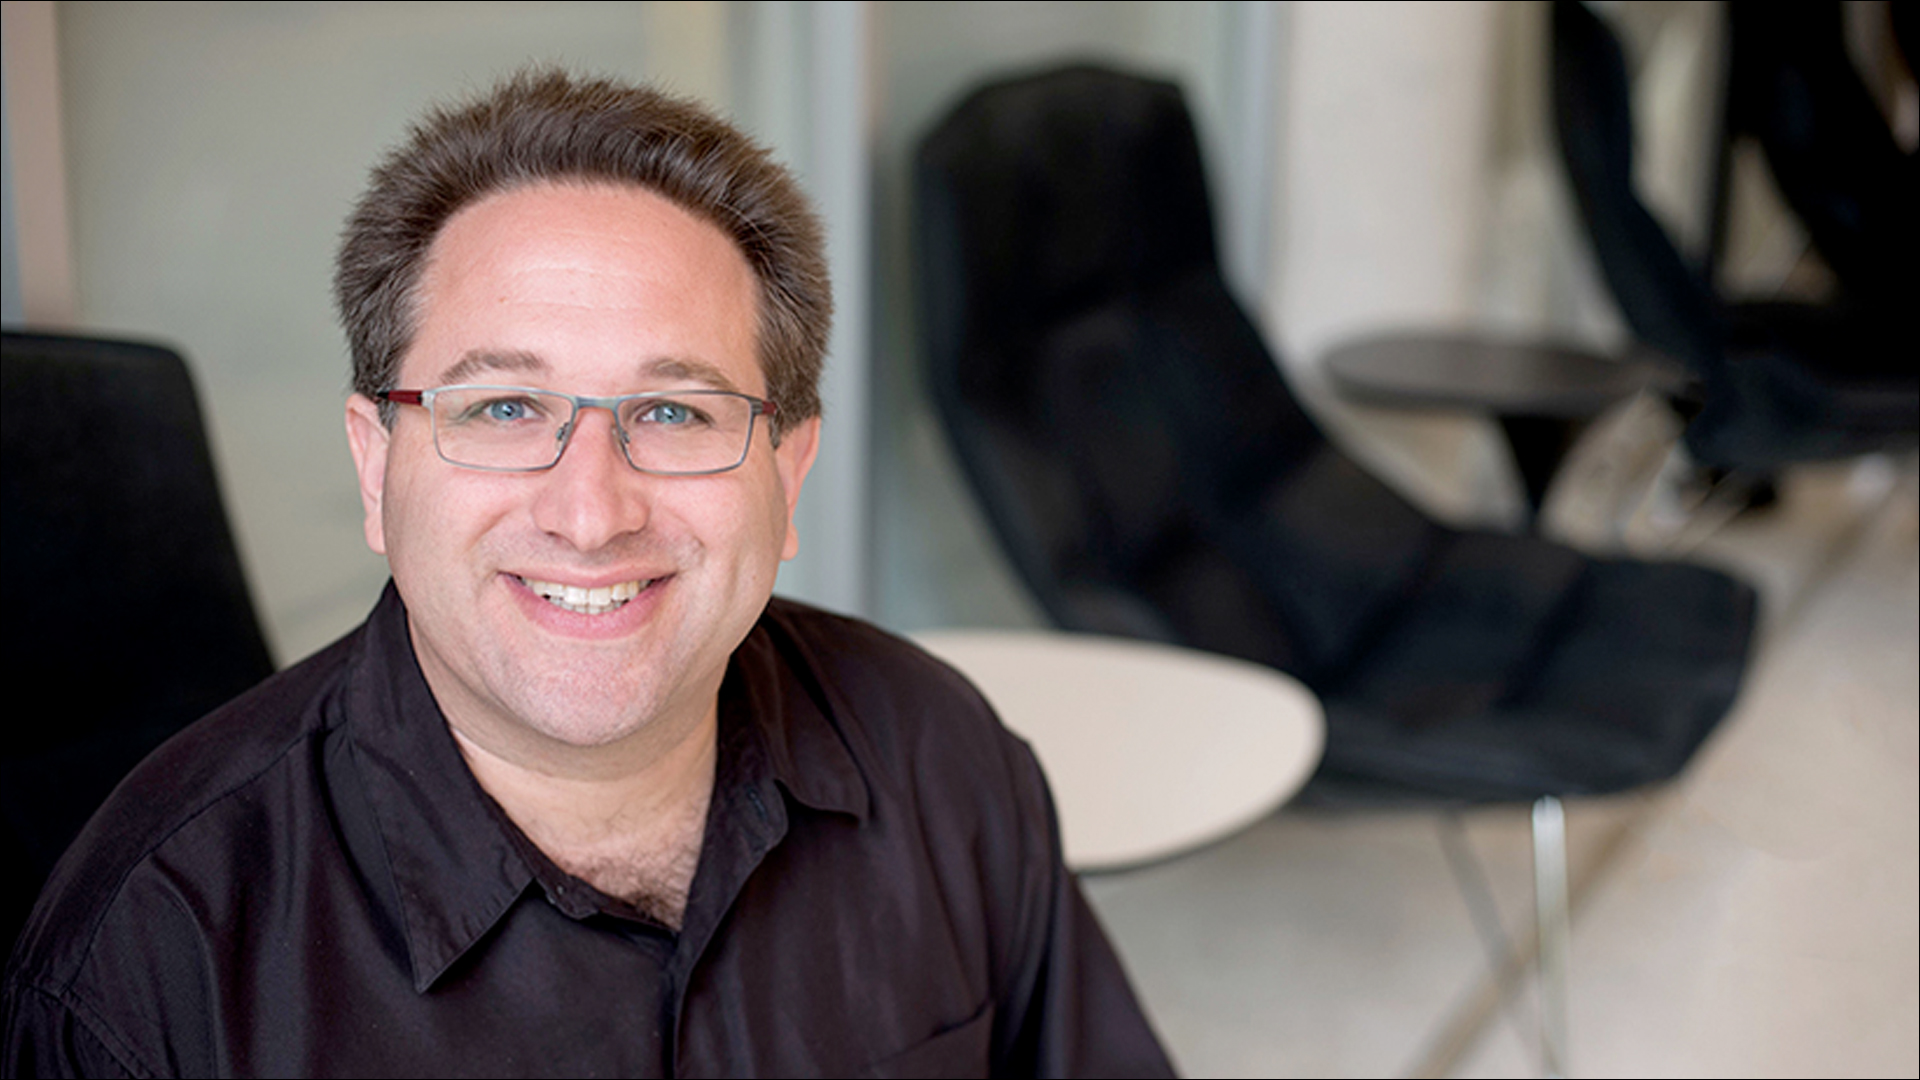 ACM, the Association for Computing Machinery, has announced that Scott Aaronson, a Professor at the University of Texas at Austin, has been named the recipient of the 2020 ACM Prize in Computing. Aaronson was recognized for groundbreaking contributions to quantum computing. 